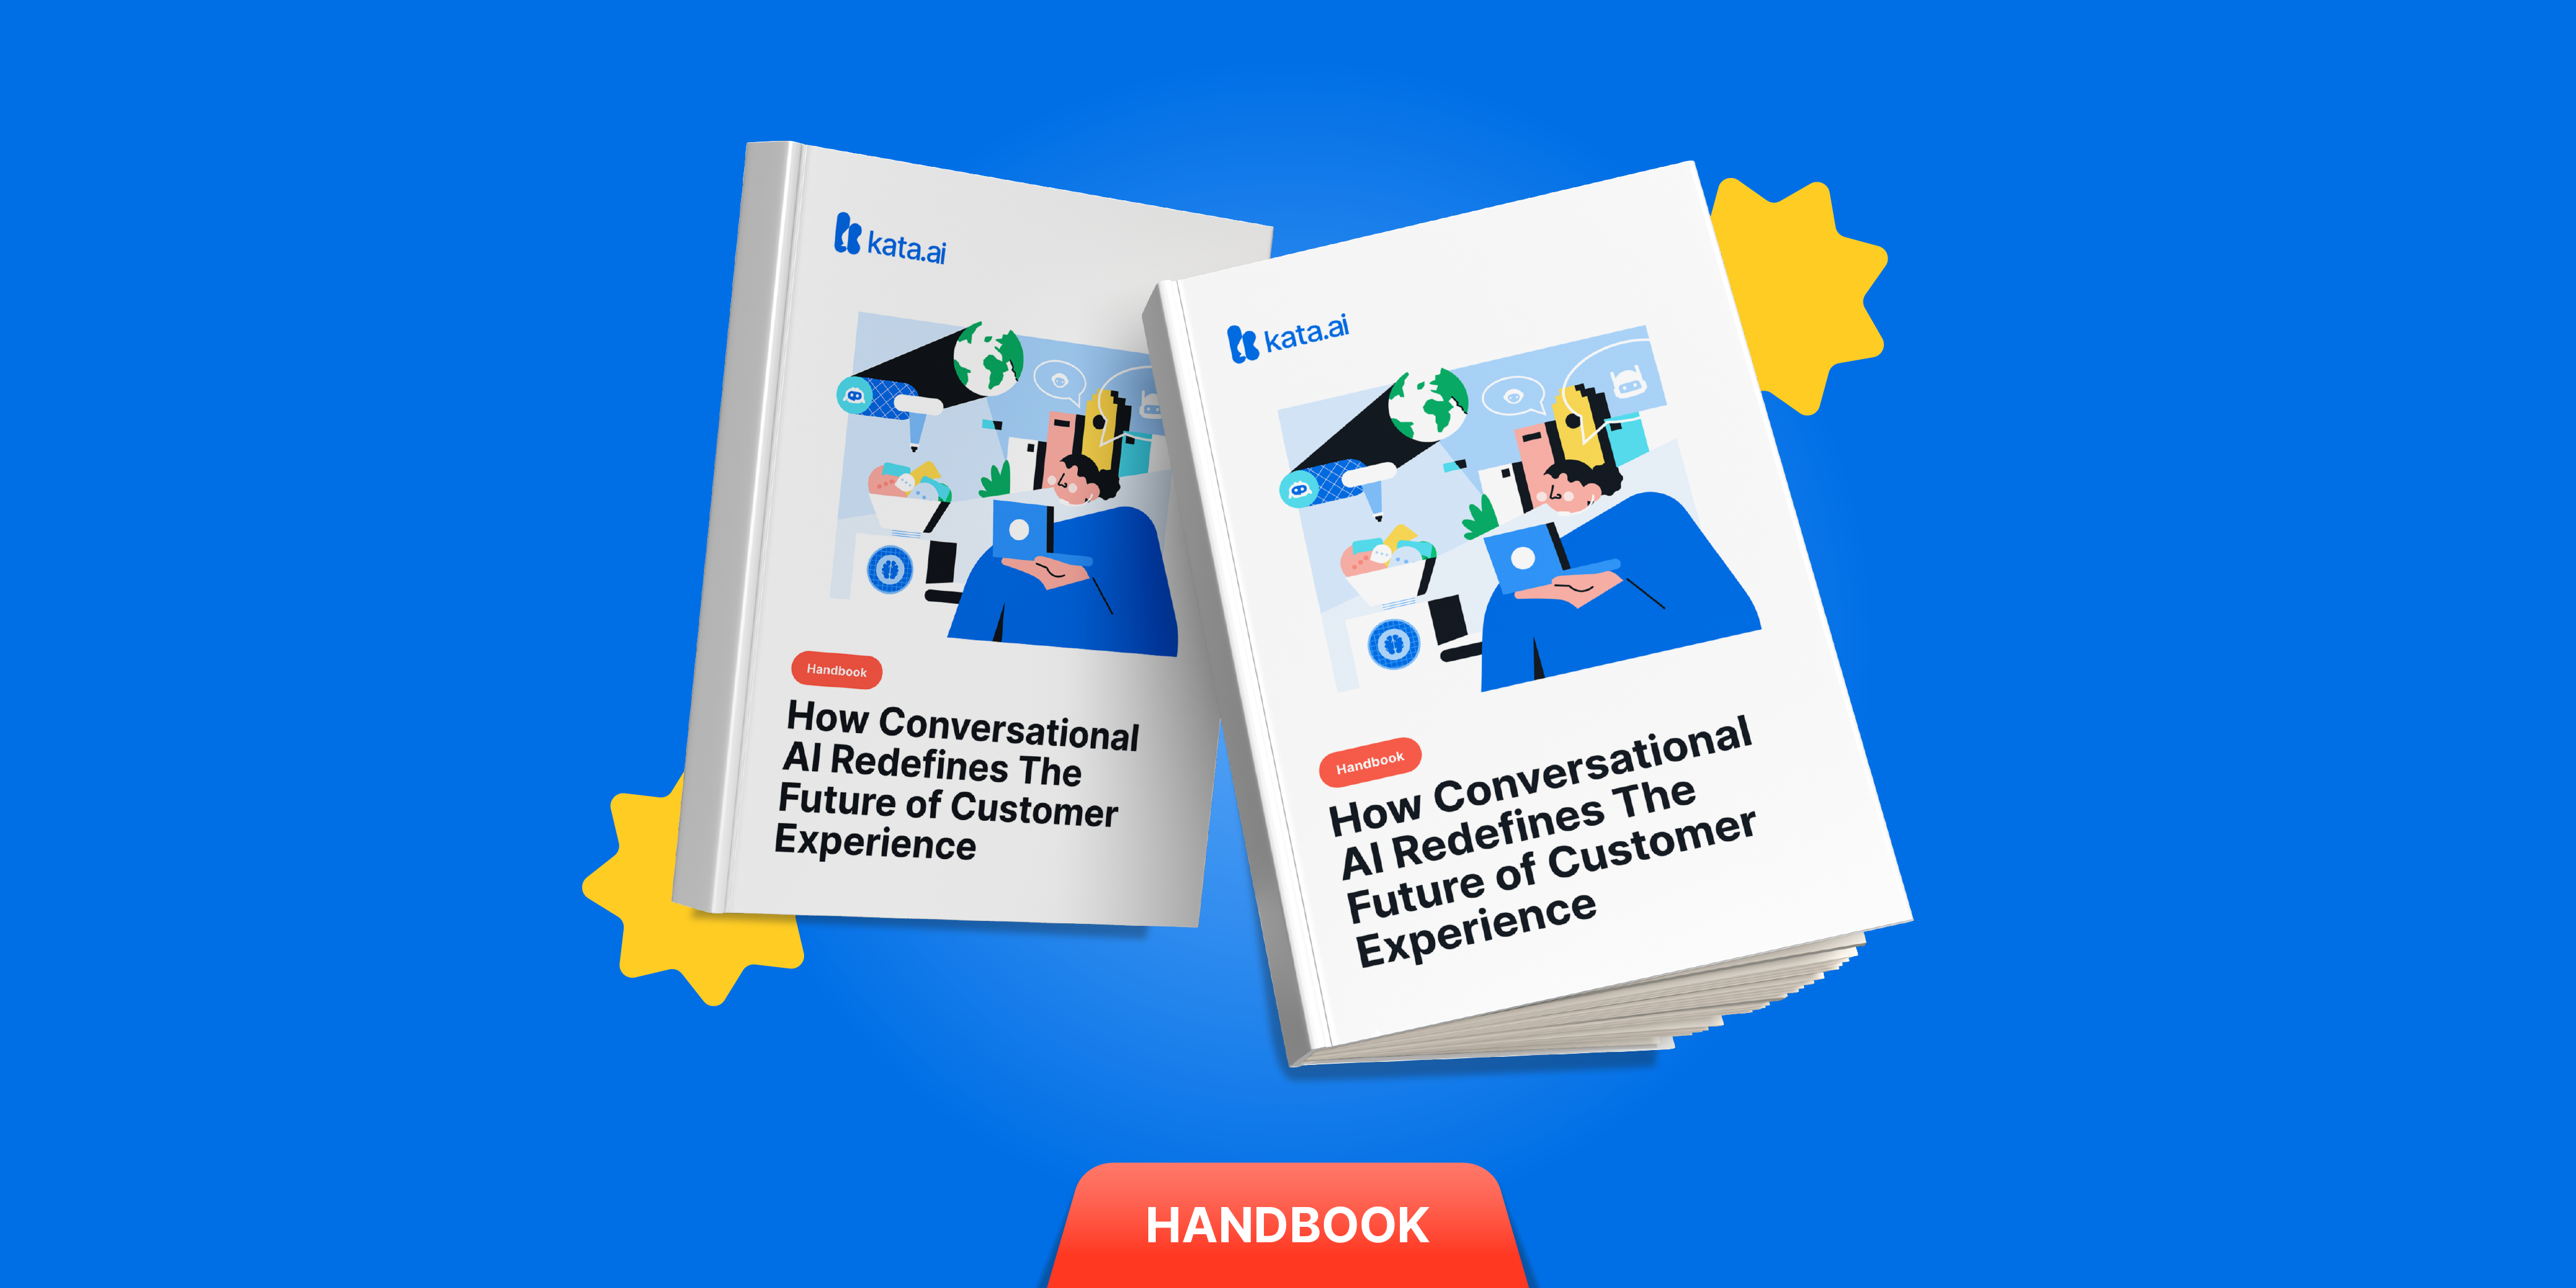 Handbook - How Conversational AI Redefines The Future of Customer Experience